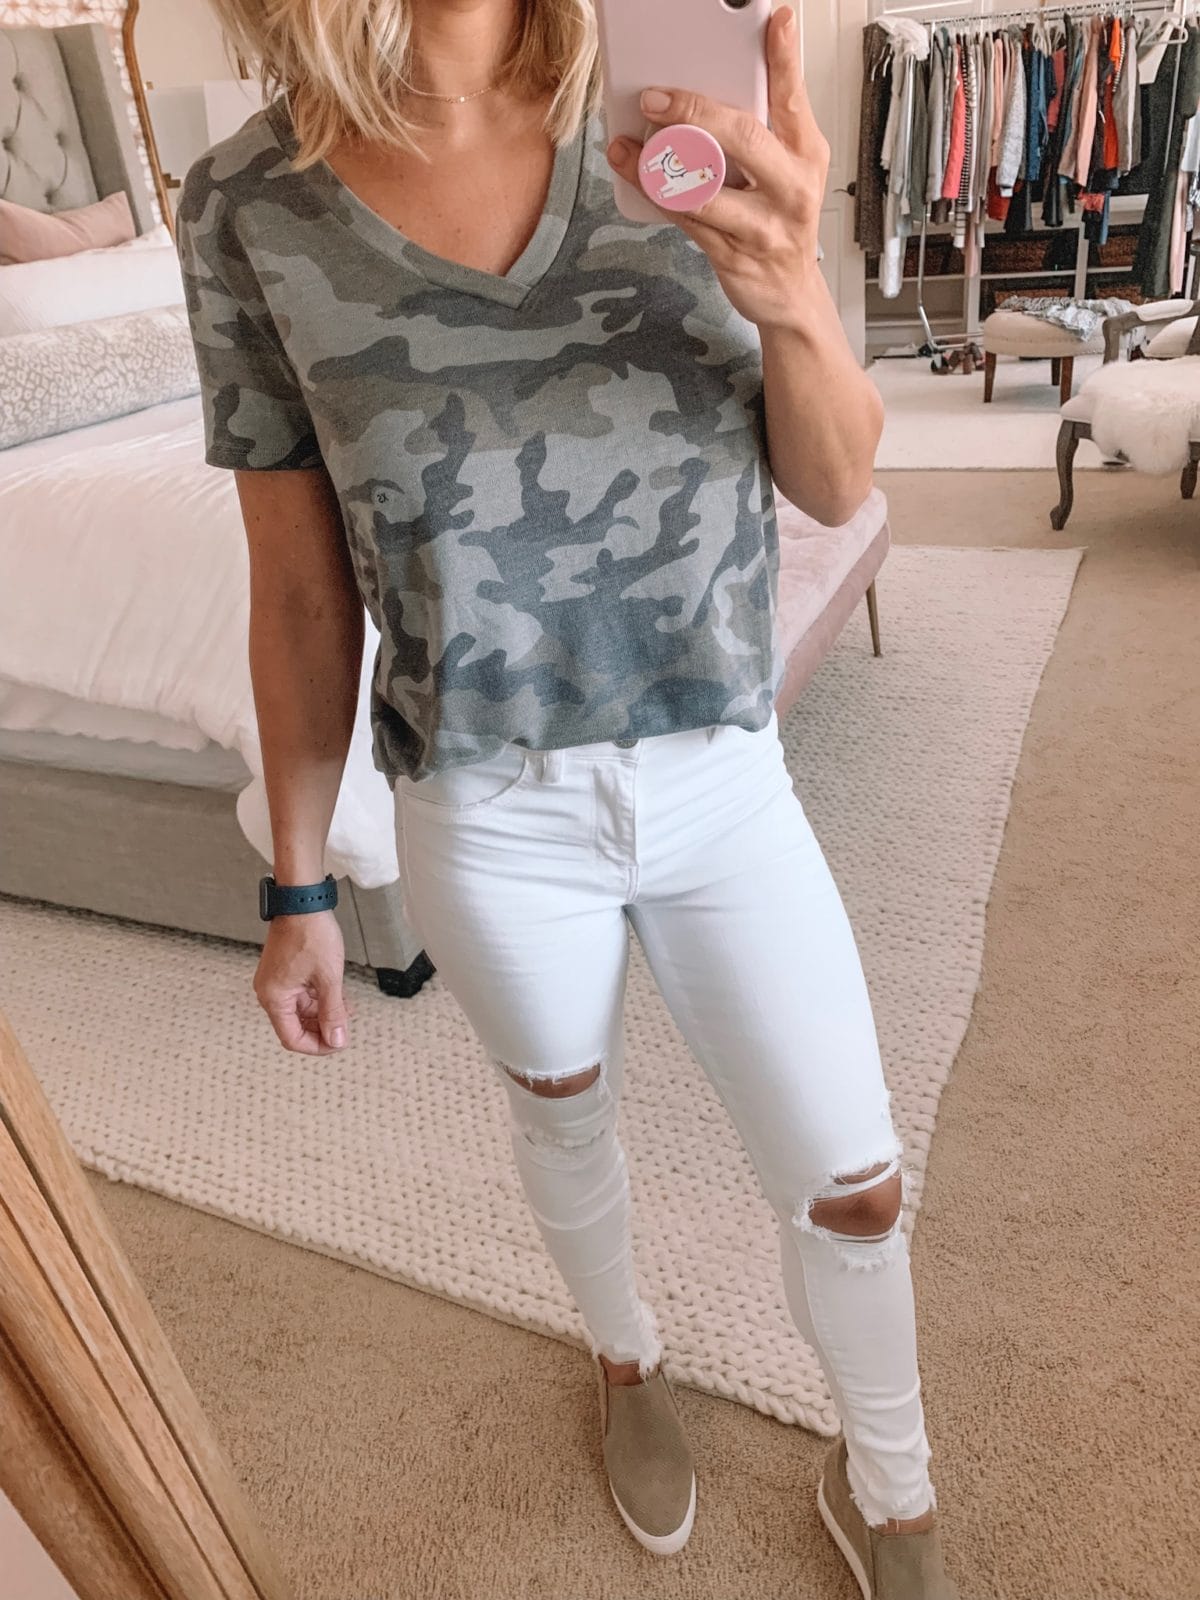 Dressing Room - Camo Top and white jeans